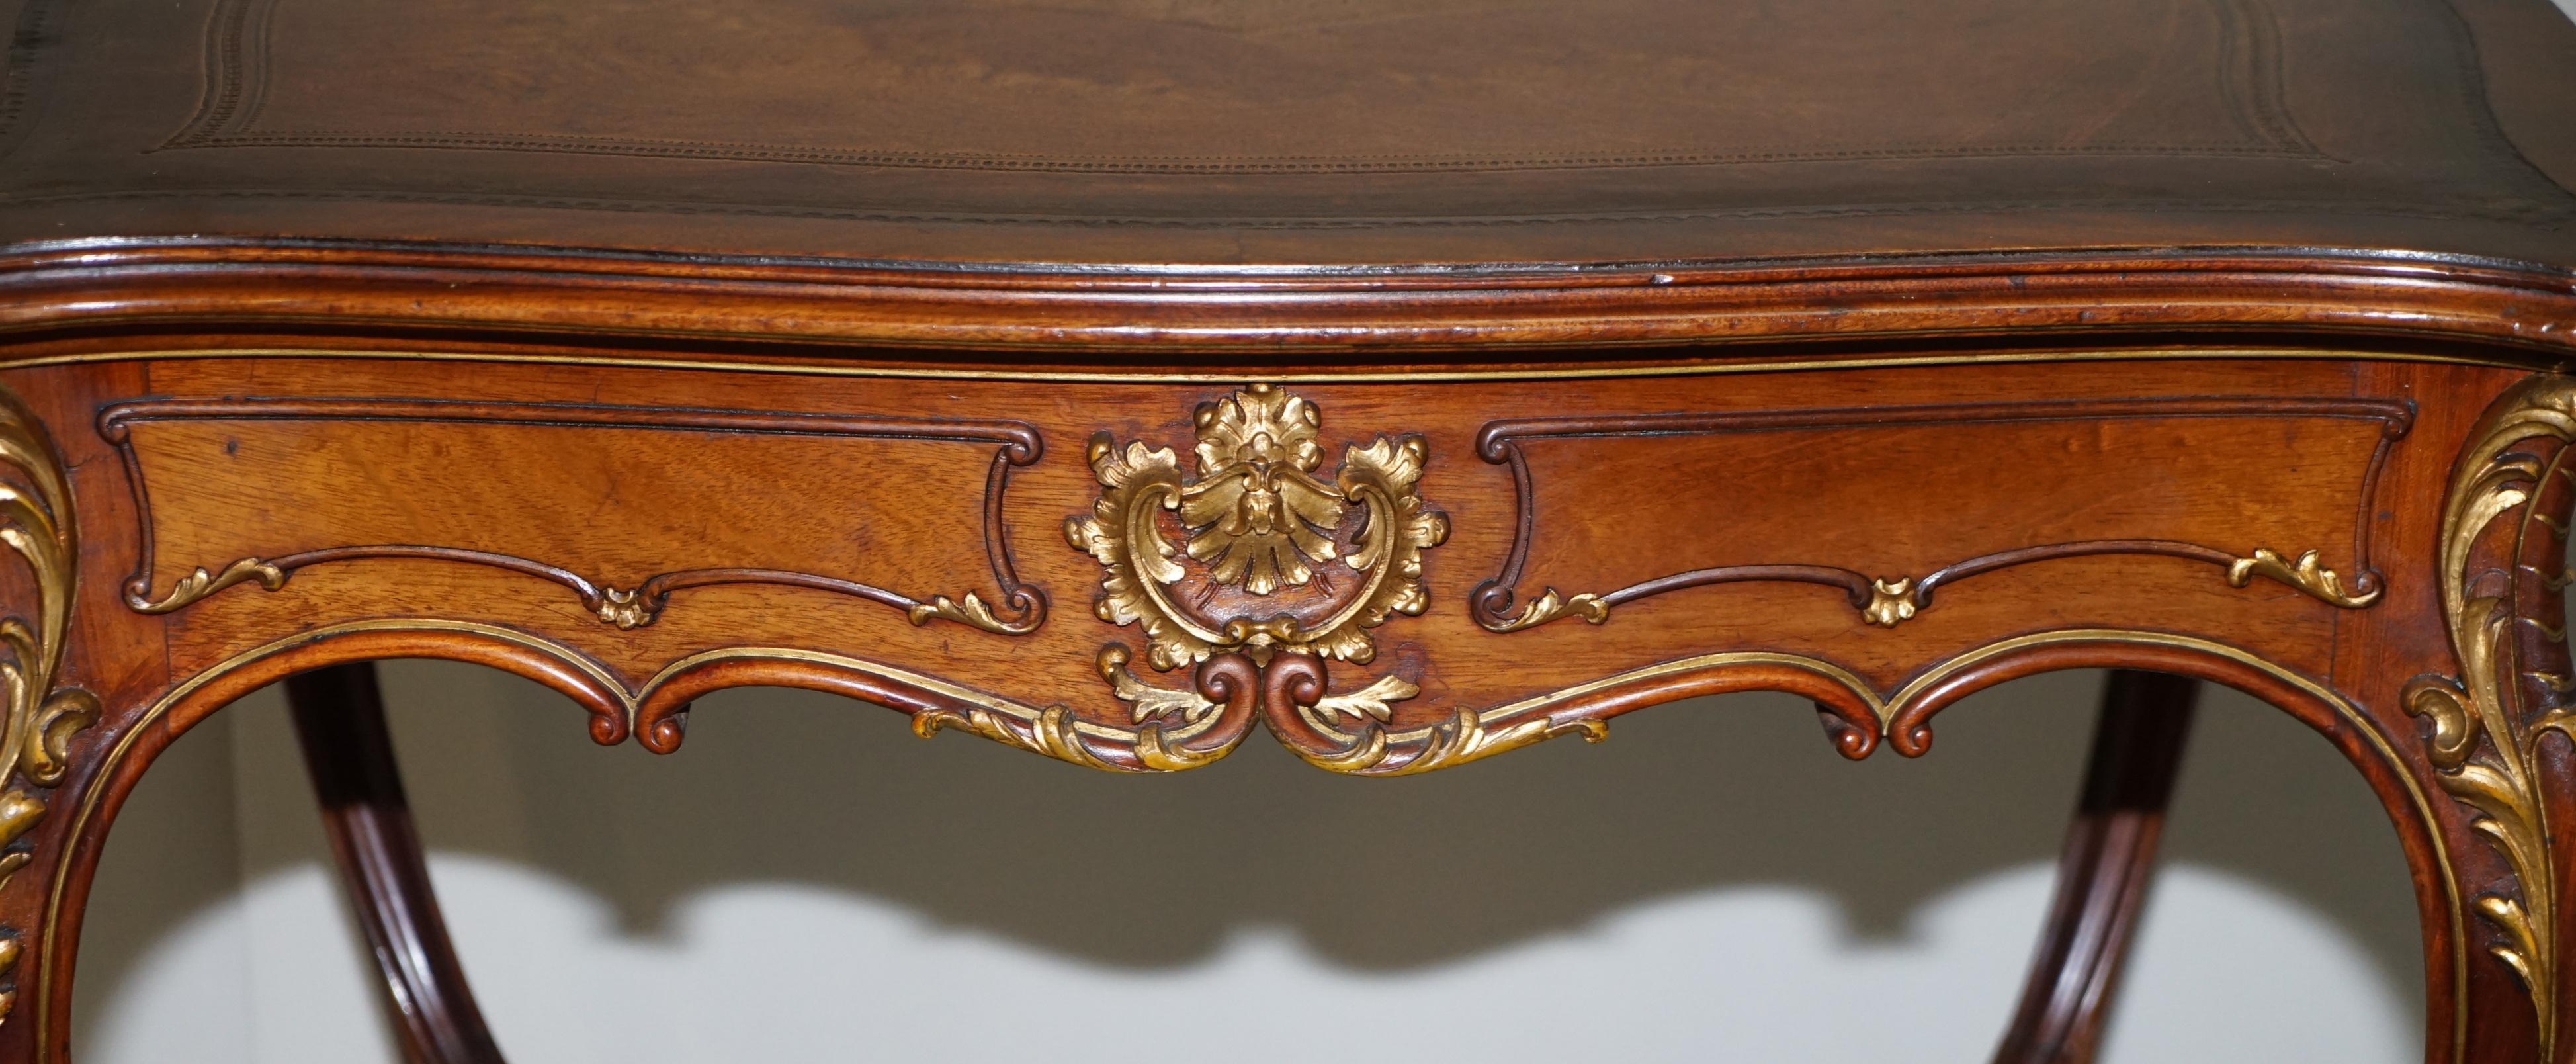 Lovely circa 1900 Late Victorian French Pine Brown Leather Gold Gilt Desk Table For Sale 4